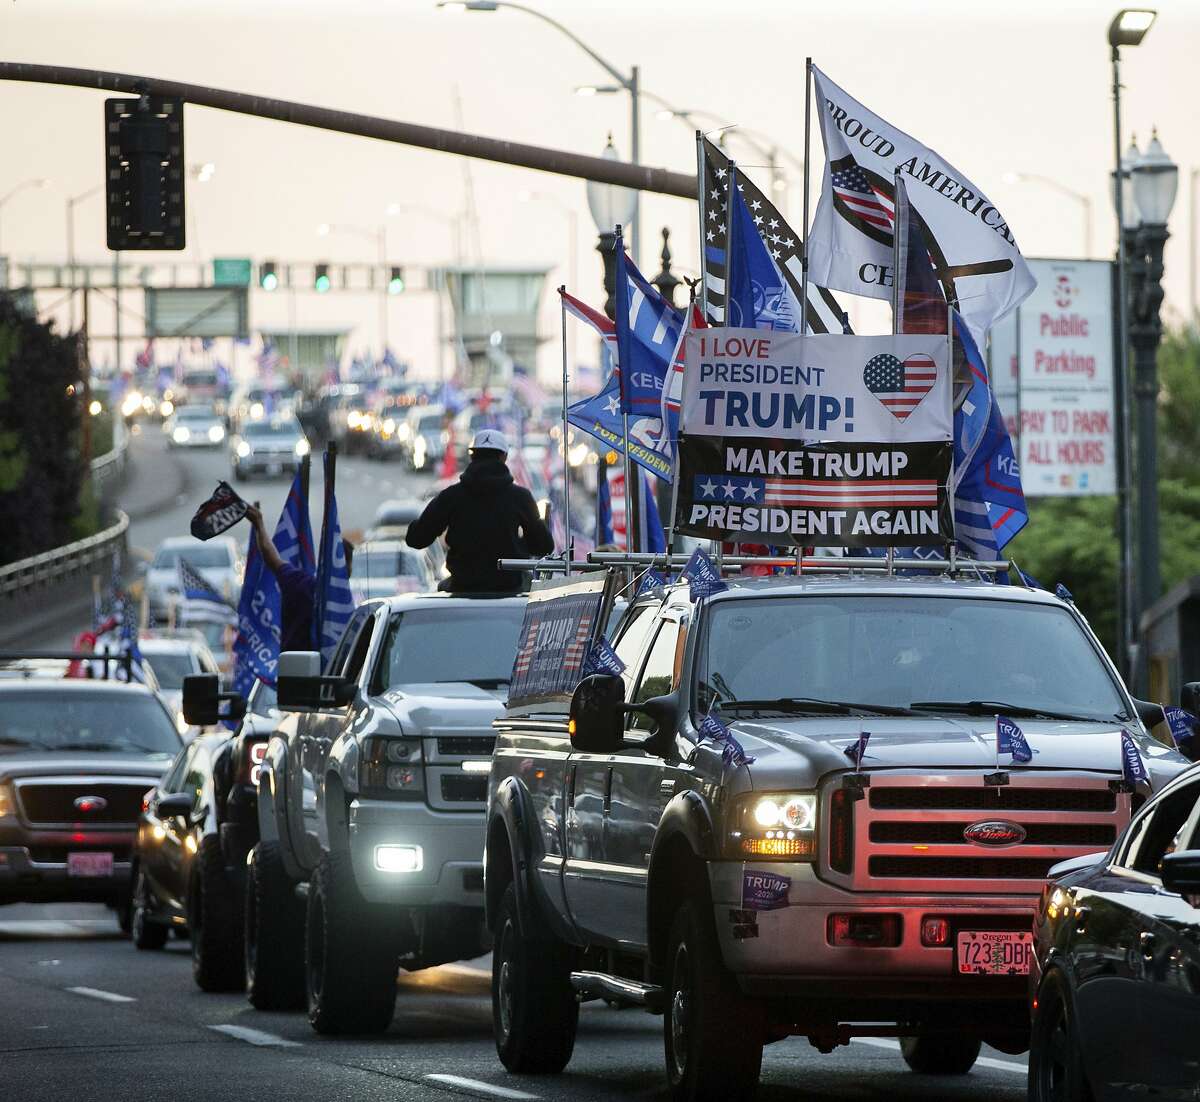 Trump supporters participate in a massive caravan that traveled through Portland, Ore., on Saturday afternoon Aug. 29, 2020. In the course of the demonstration, one man was shot and killed in downtown Portland. (Mark Graves/The Oregonian via AP)